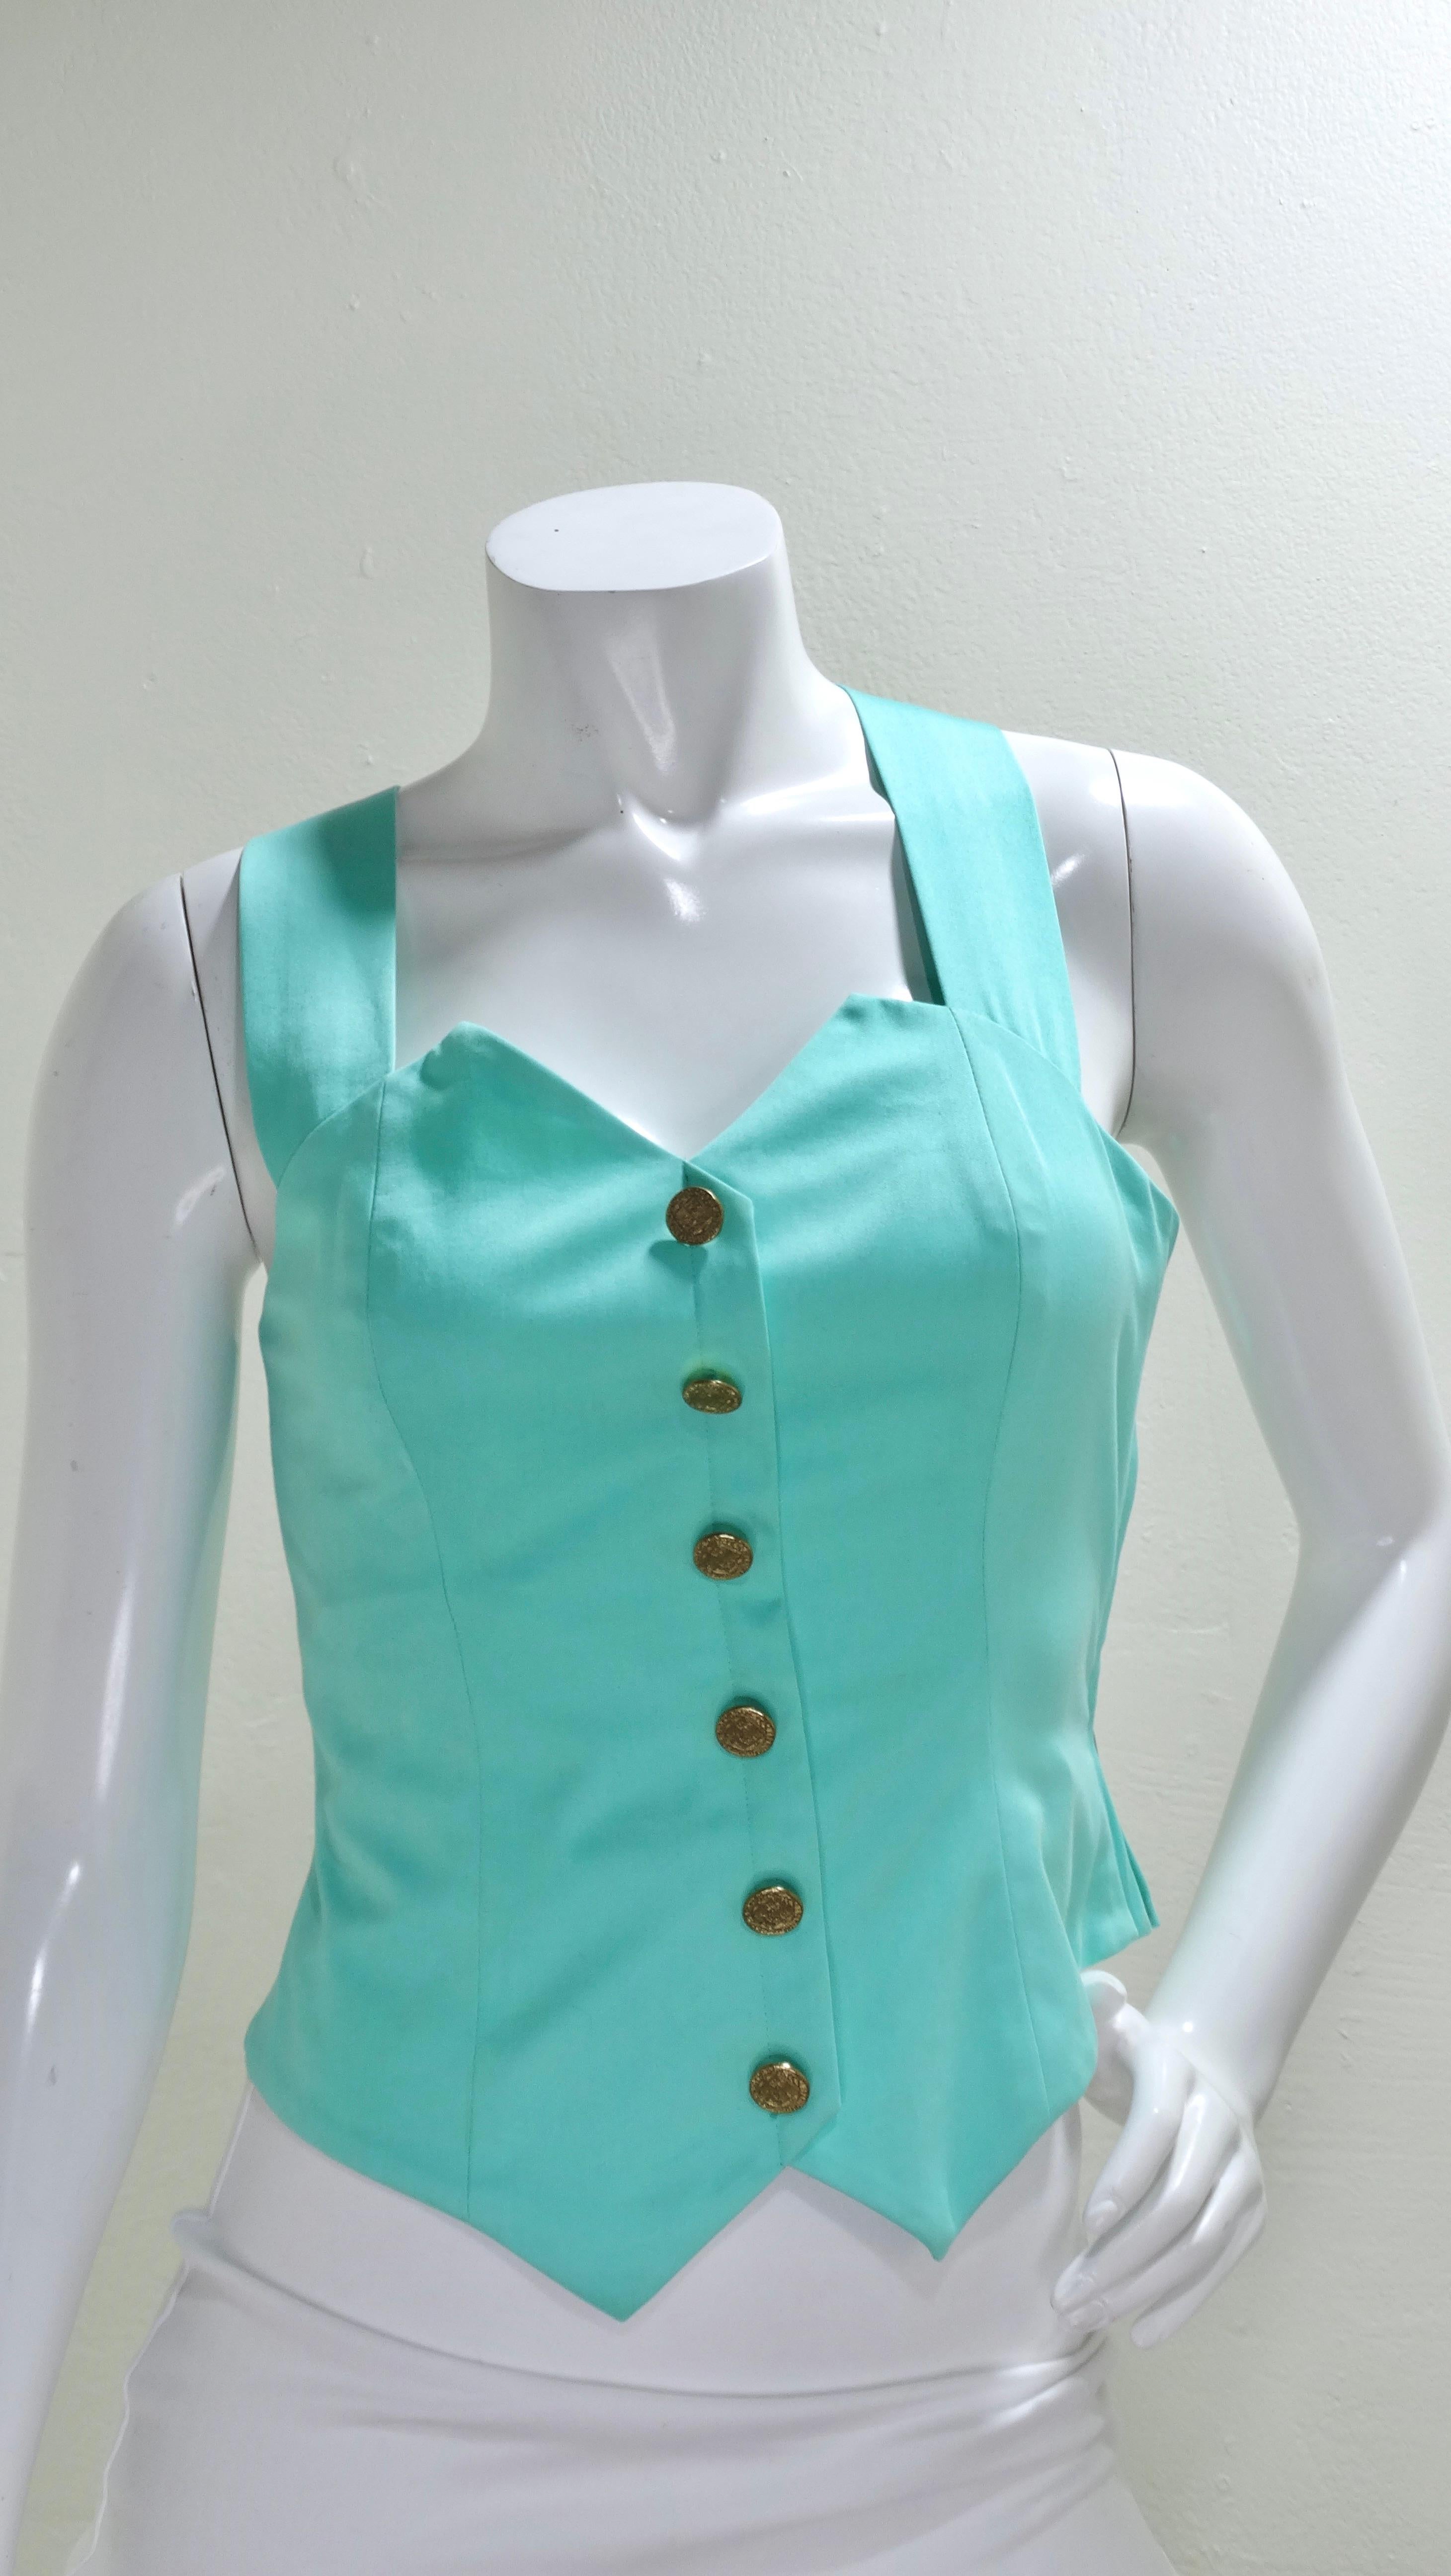 A 1990's Yves Saint Laurent gem! Bustiers are never going to go out of style and never fail to make you feel your very best. This bustier is not lined, features six intricate buttons lining the front, crossover straps, and a zip-closure. Pair with a